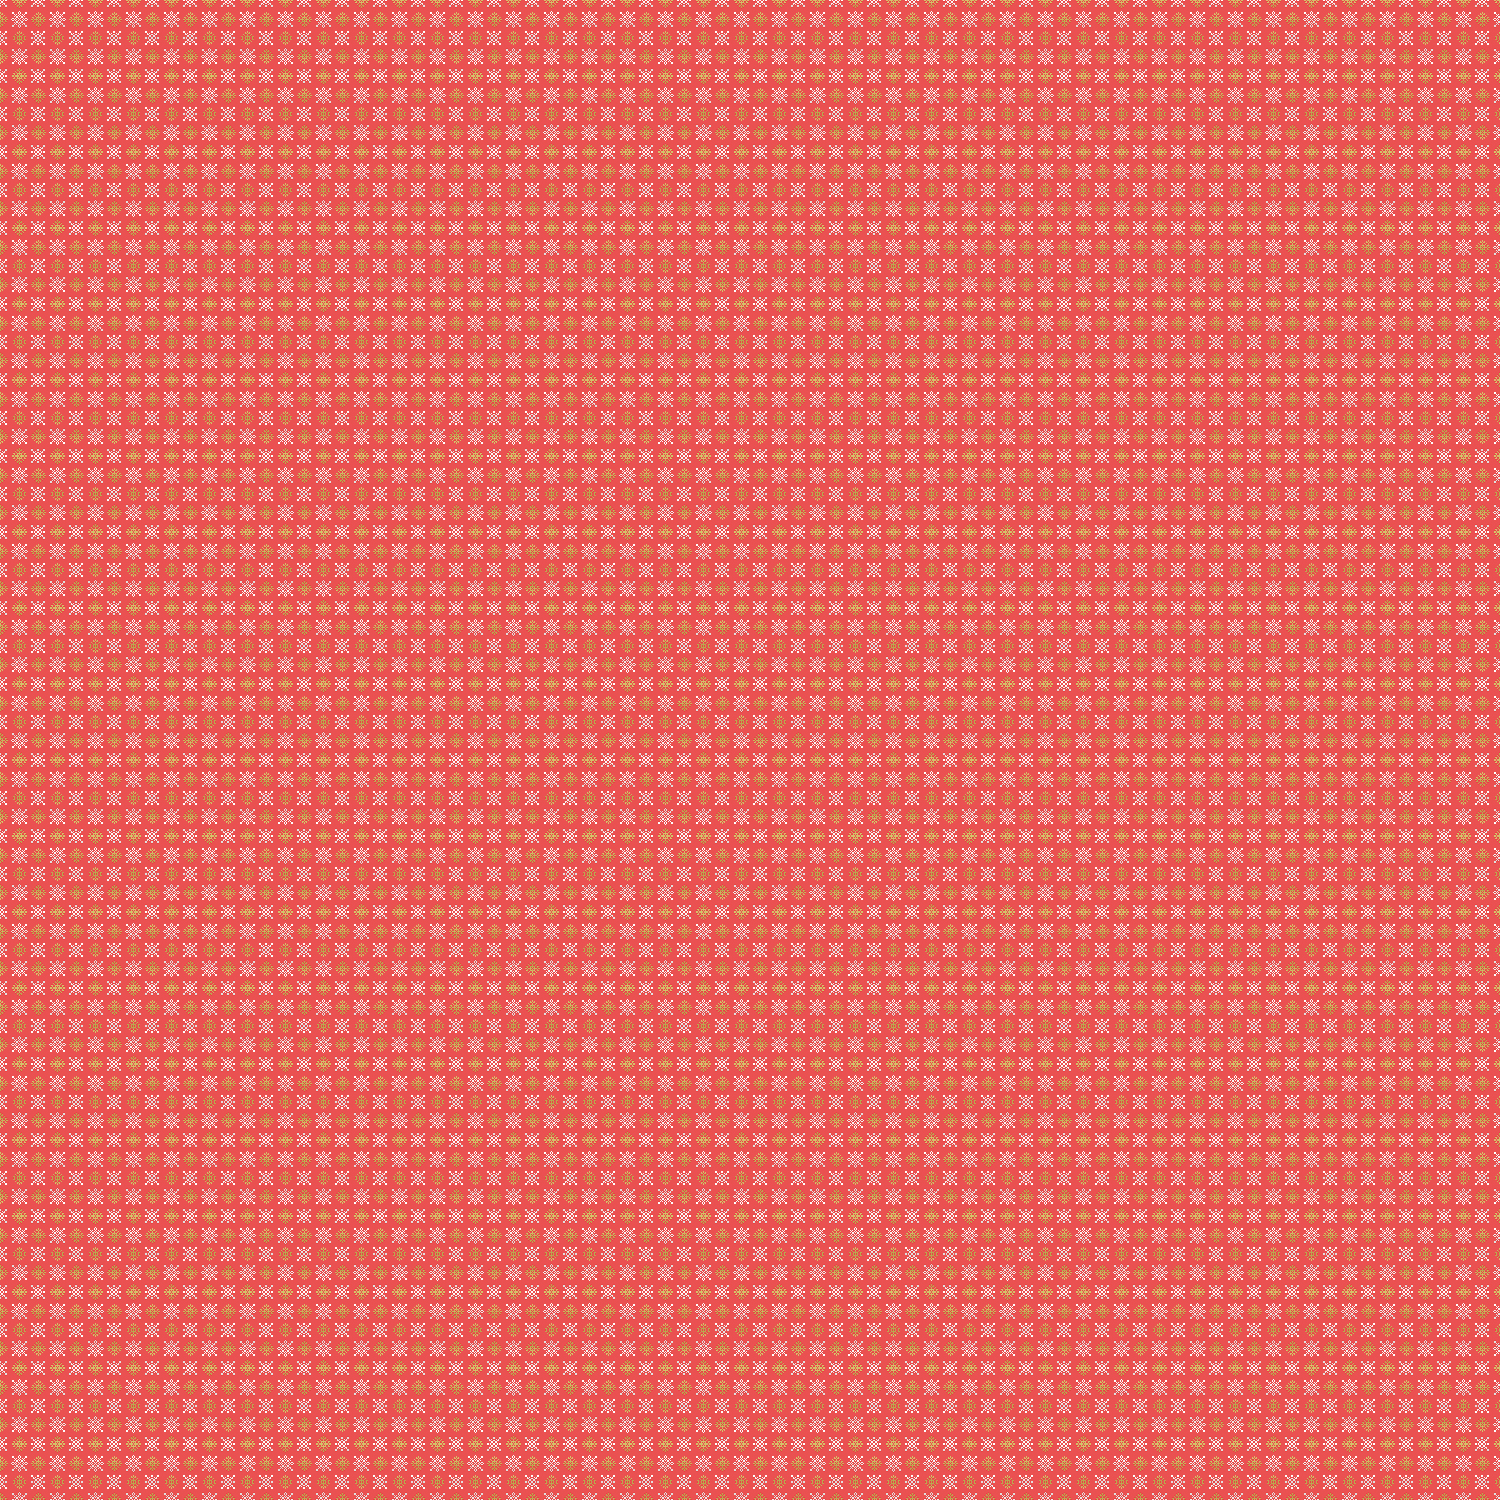 Free Christmas Backgrounds Wallpapers Photoshop Patterns